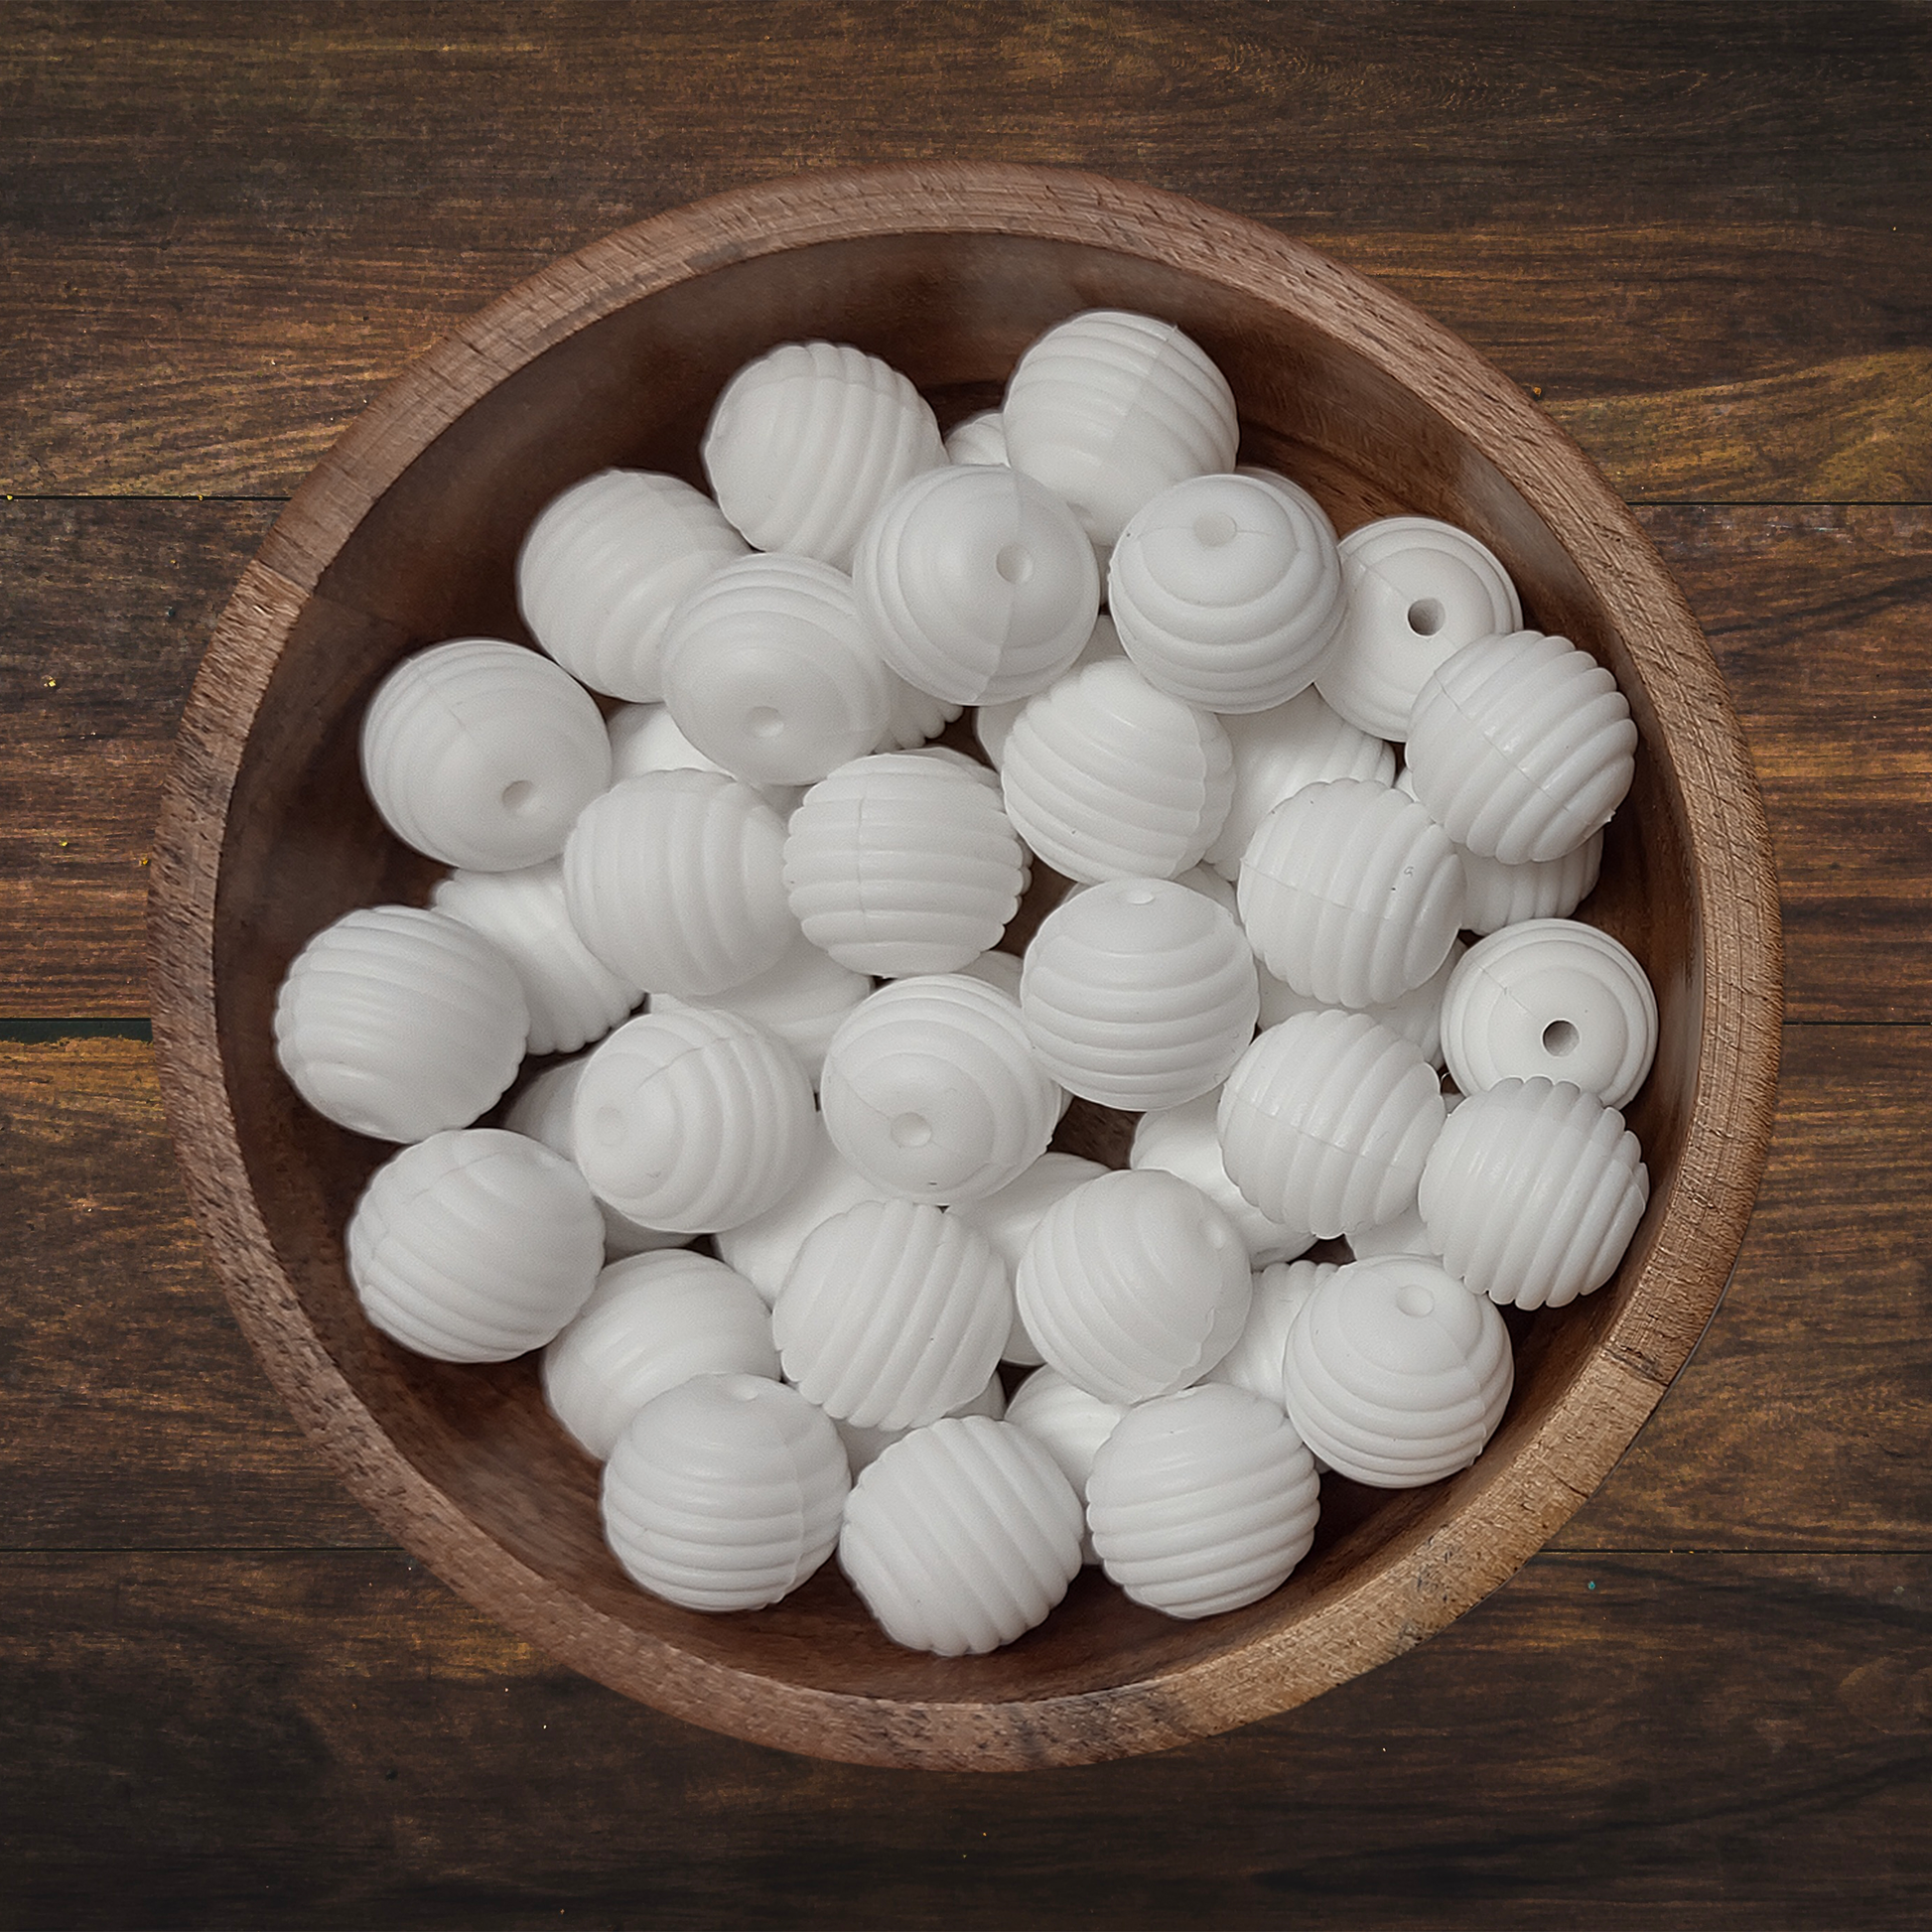 15mm Pearl White Silicone Beads, White Round Silicone Beads, Beads Who –  The Silicone Bead Store LLC